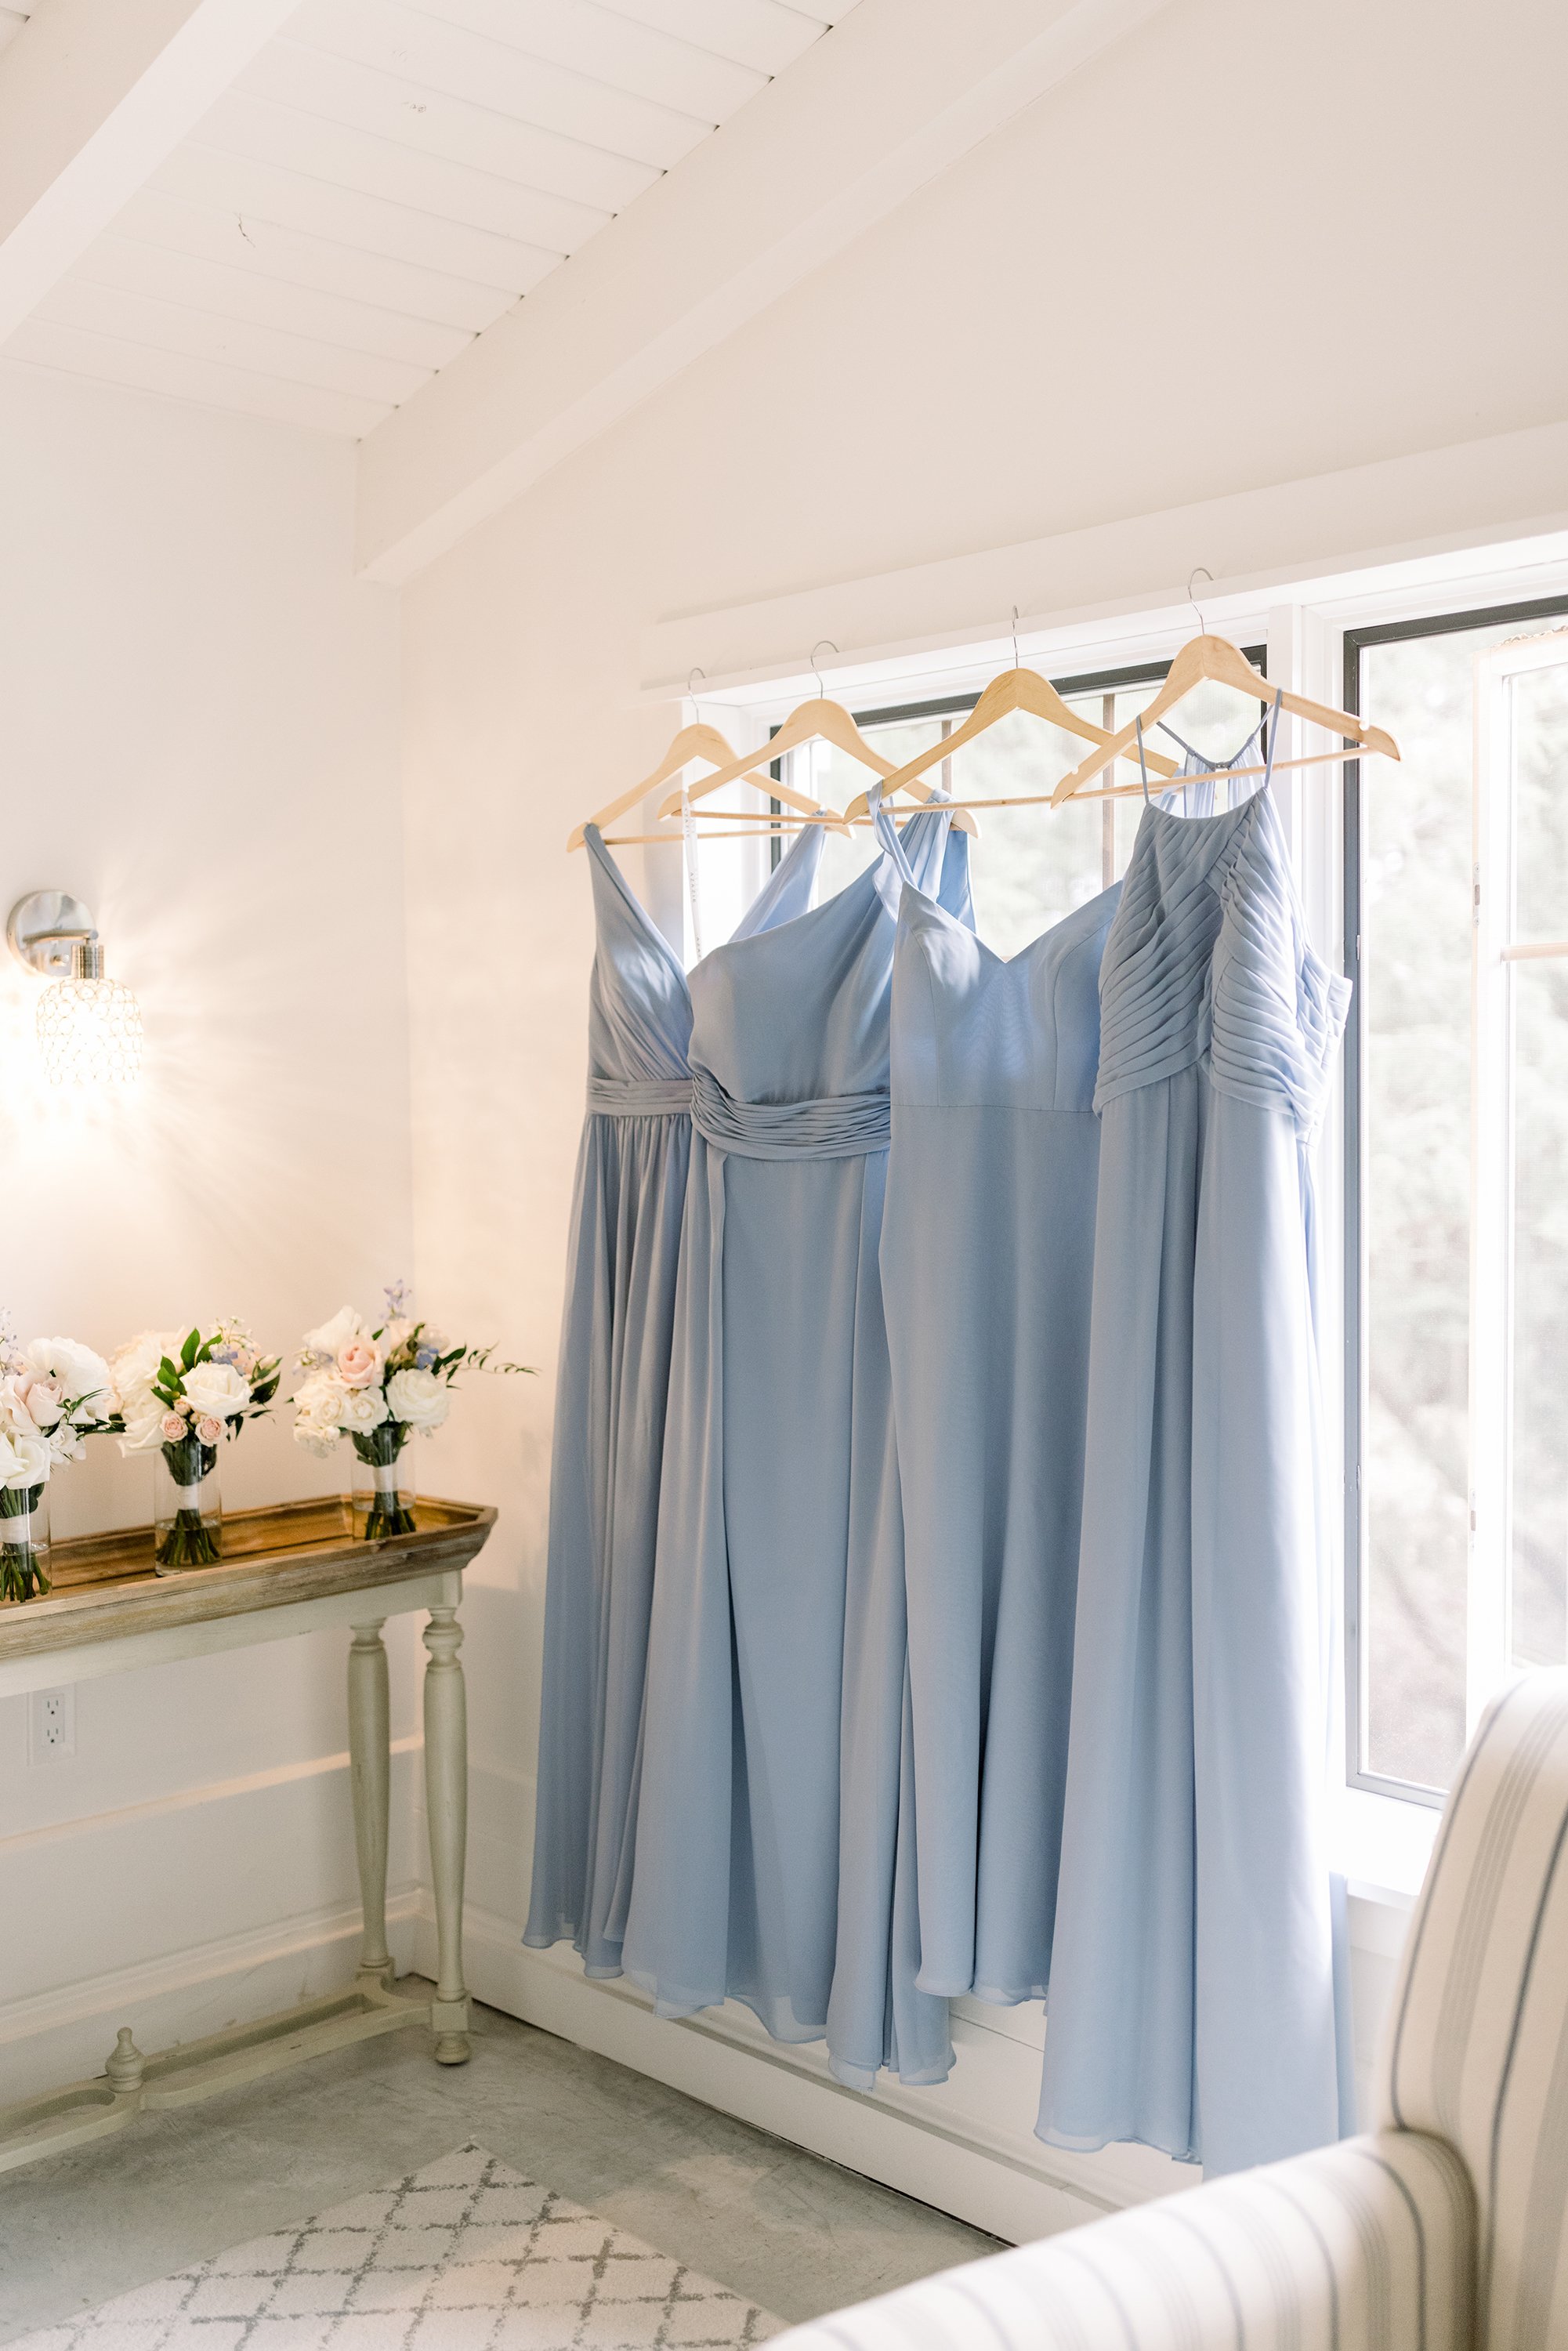  Light blue bridesmaid gowns hanging in a window in the bridal suite were captured by Chelsea Mason Photography. blue bridesmaid gowns #ChelseaMasonPhotography #ChelseaMasonWeddings #WakefieldWeddings #LeBelvedere #Wakefieldweddingphotographers 